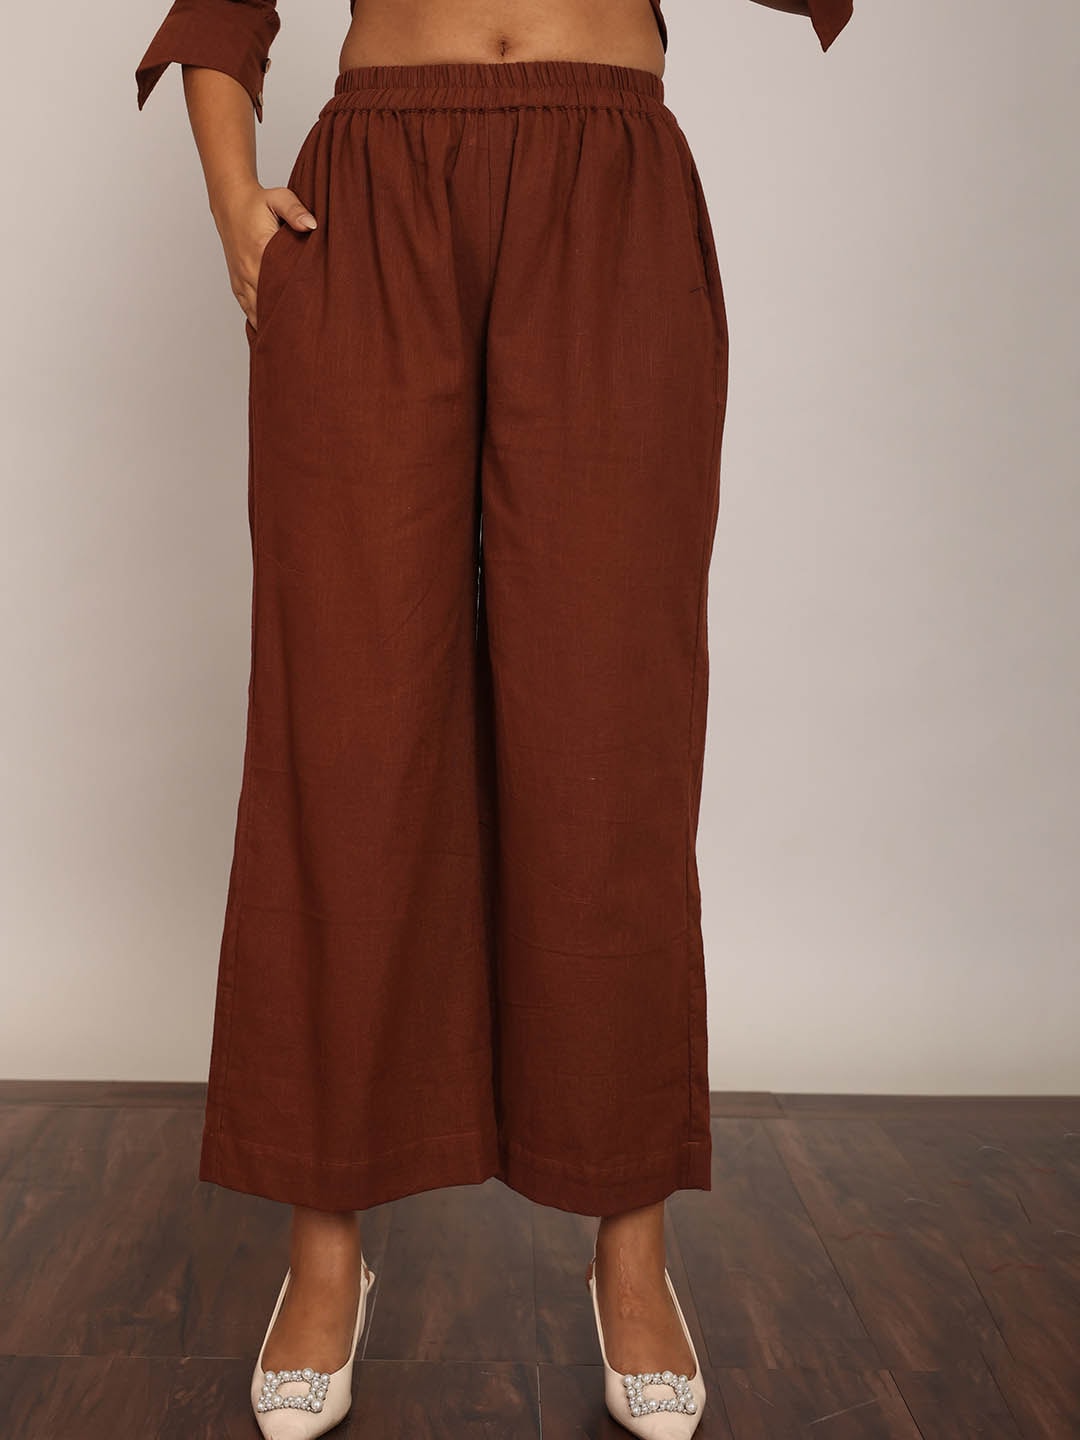 KAORI BY SHREYA AGARWAL Cotton Relaxed-Fit Trousers Price in India